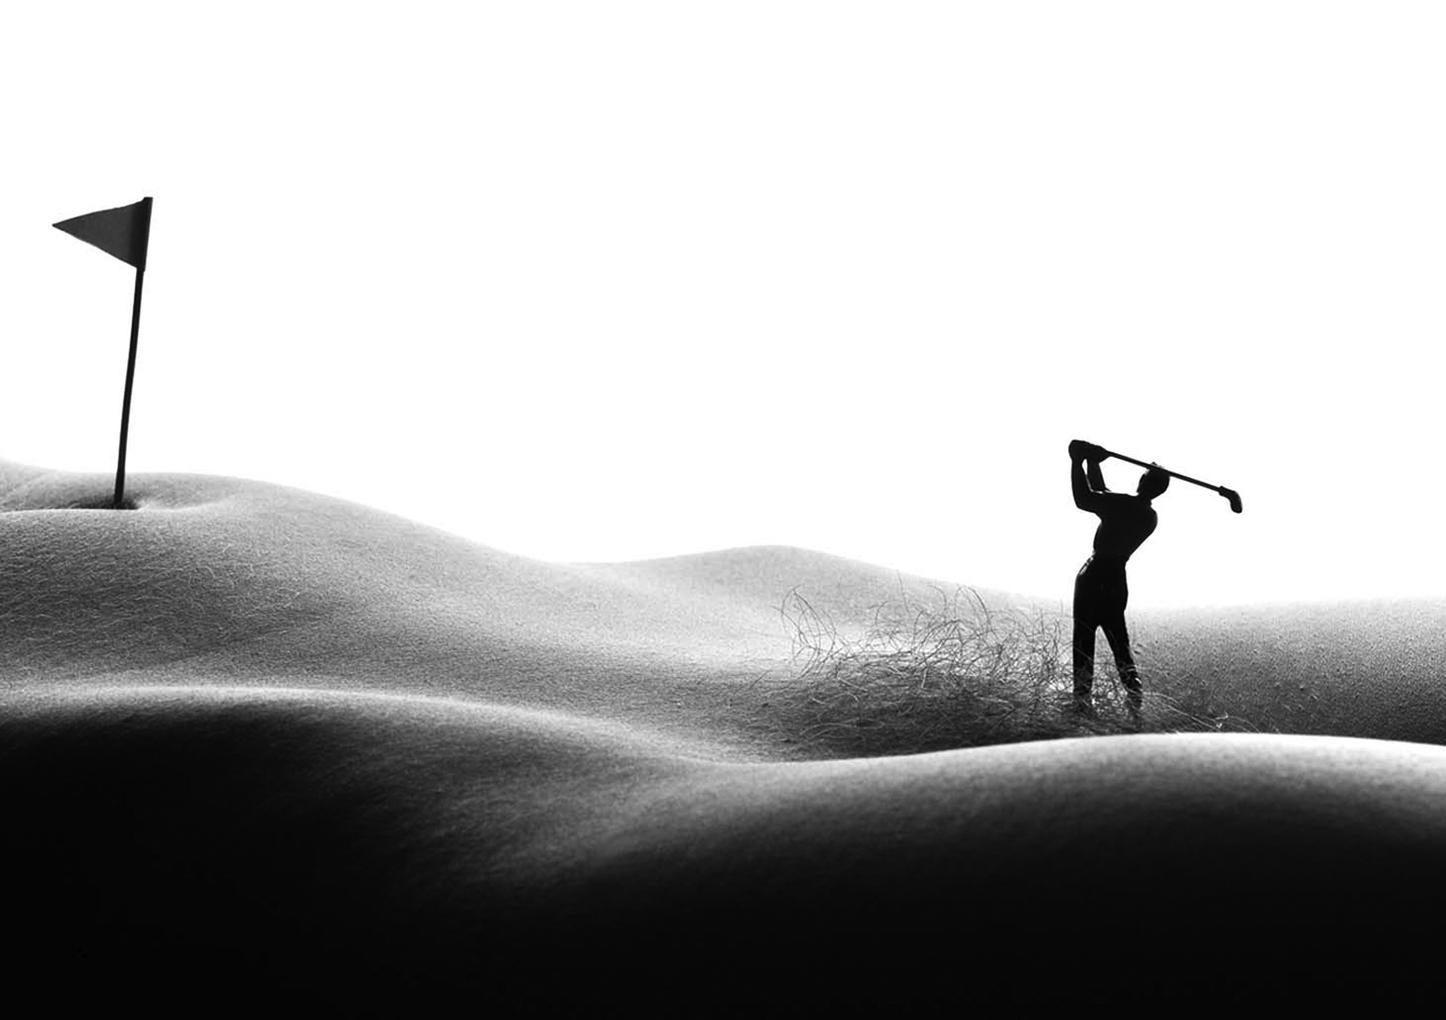 Golfing in the rough - black and white photography - Black Nude Photograph by Allan I. Teger